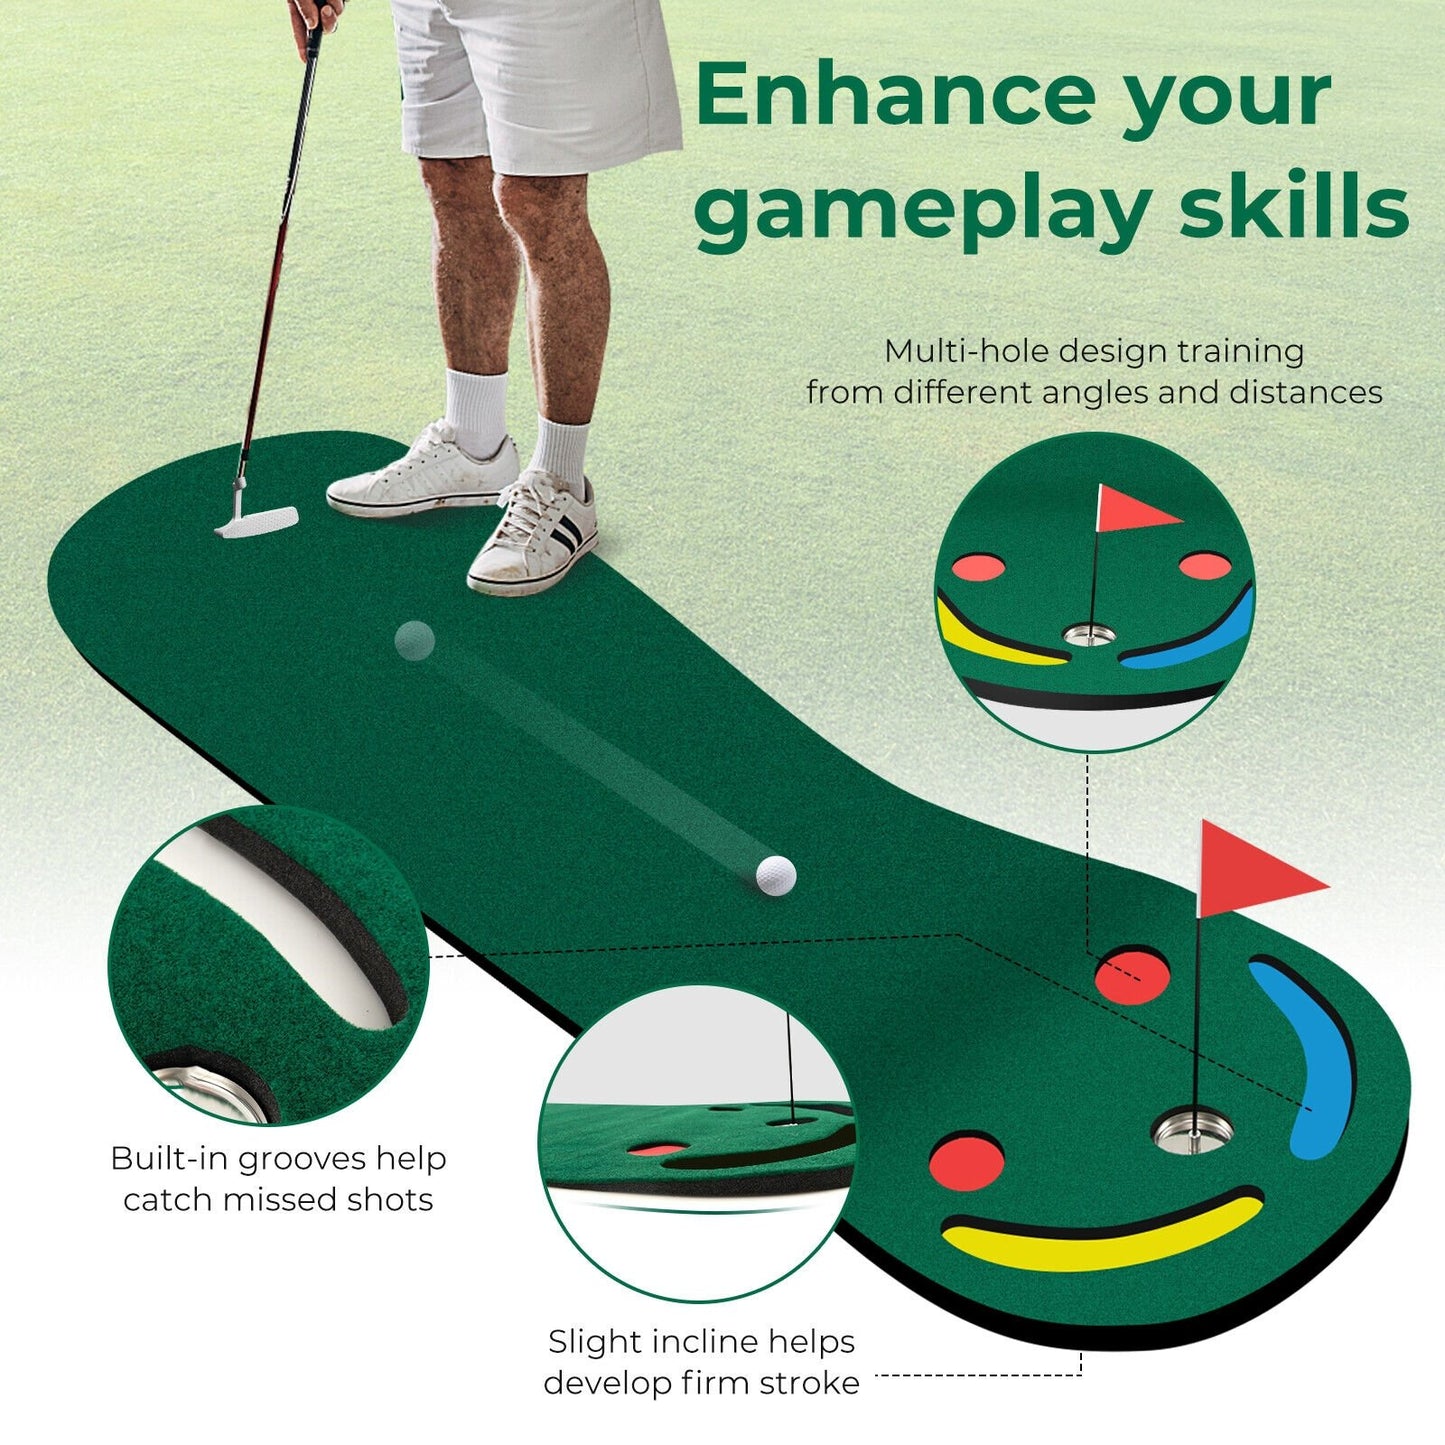 Golf Putting Green Set for Indoor Outdoor Use